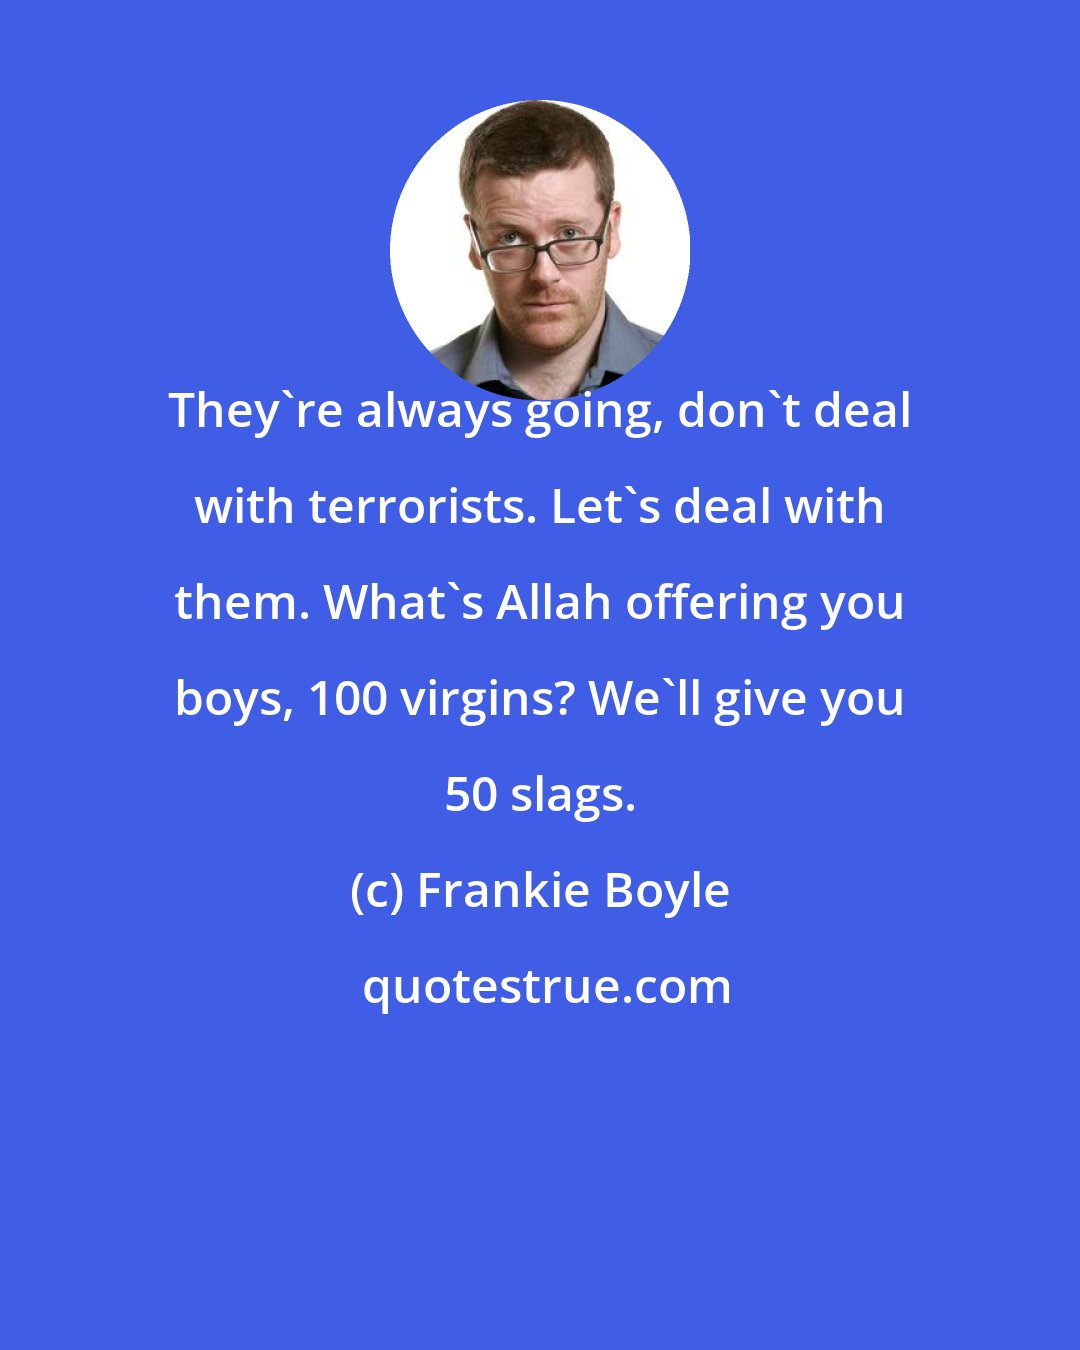 Frankie Boyle: They're always going, don't deal with terrorists. Let's deal with them. What's Allah offering you boys, 100 virgins? We'll give you 50 slags.